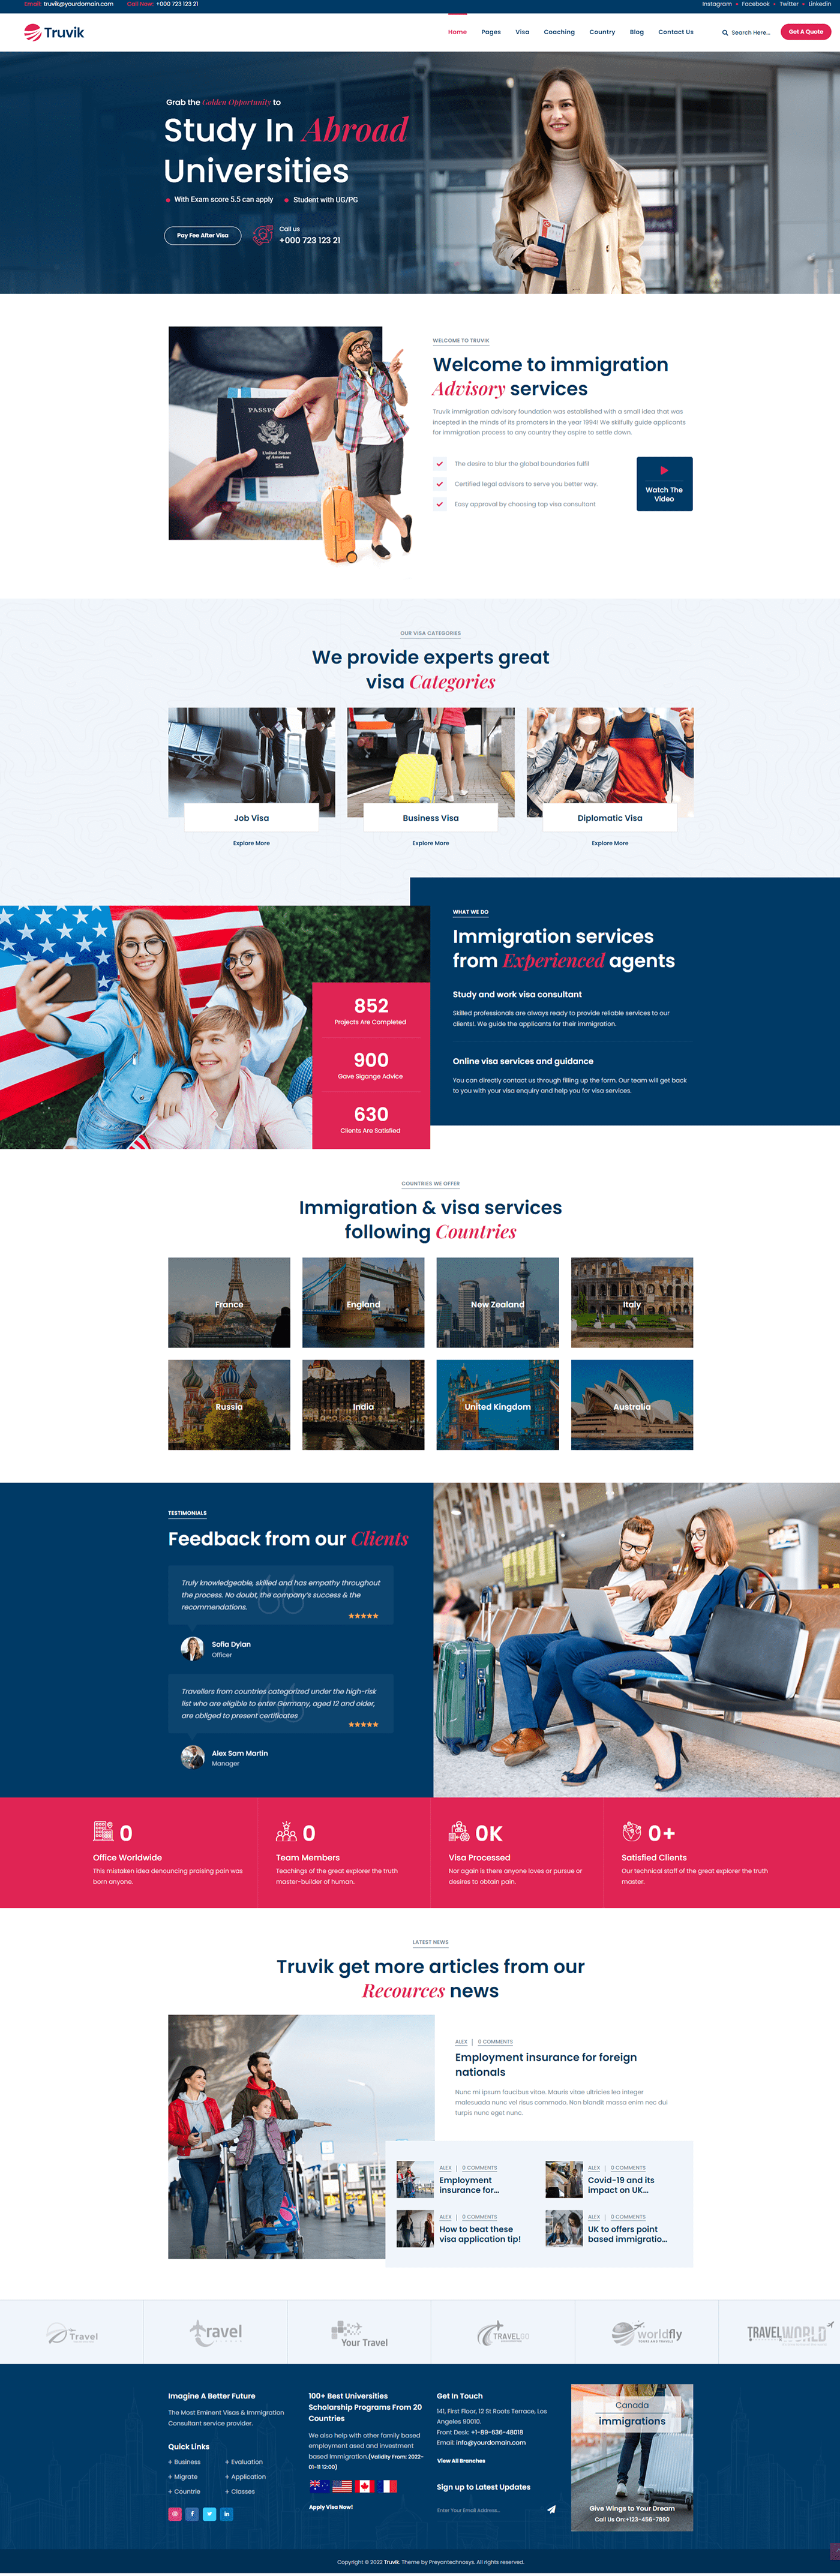 Truvik Iconic  WordPress Theme for visa consulting, immigration services, and more.